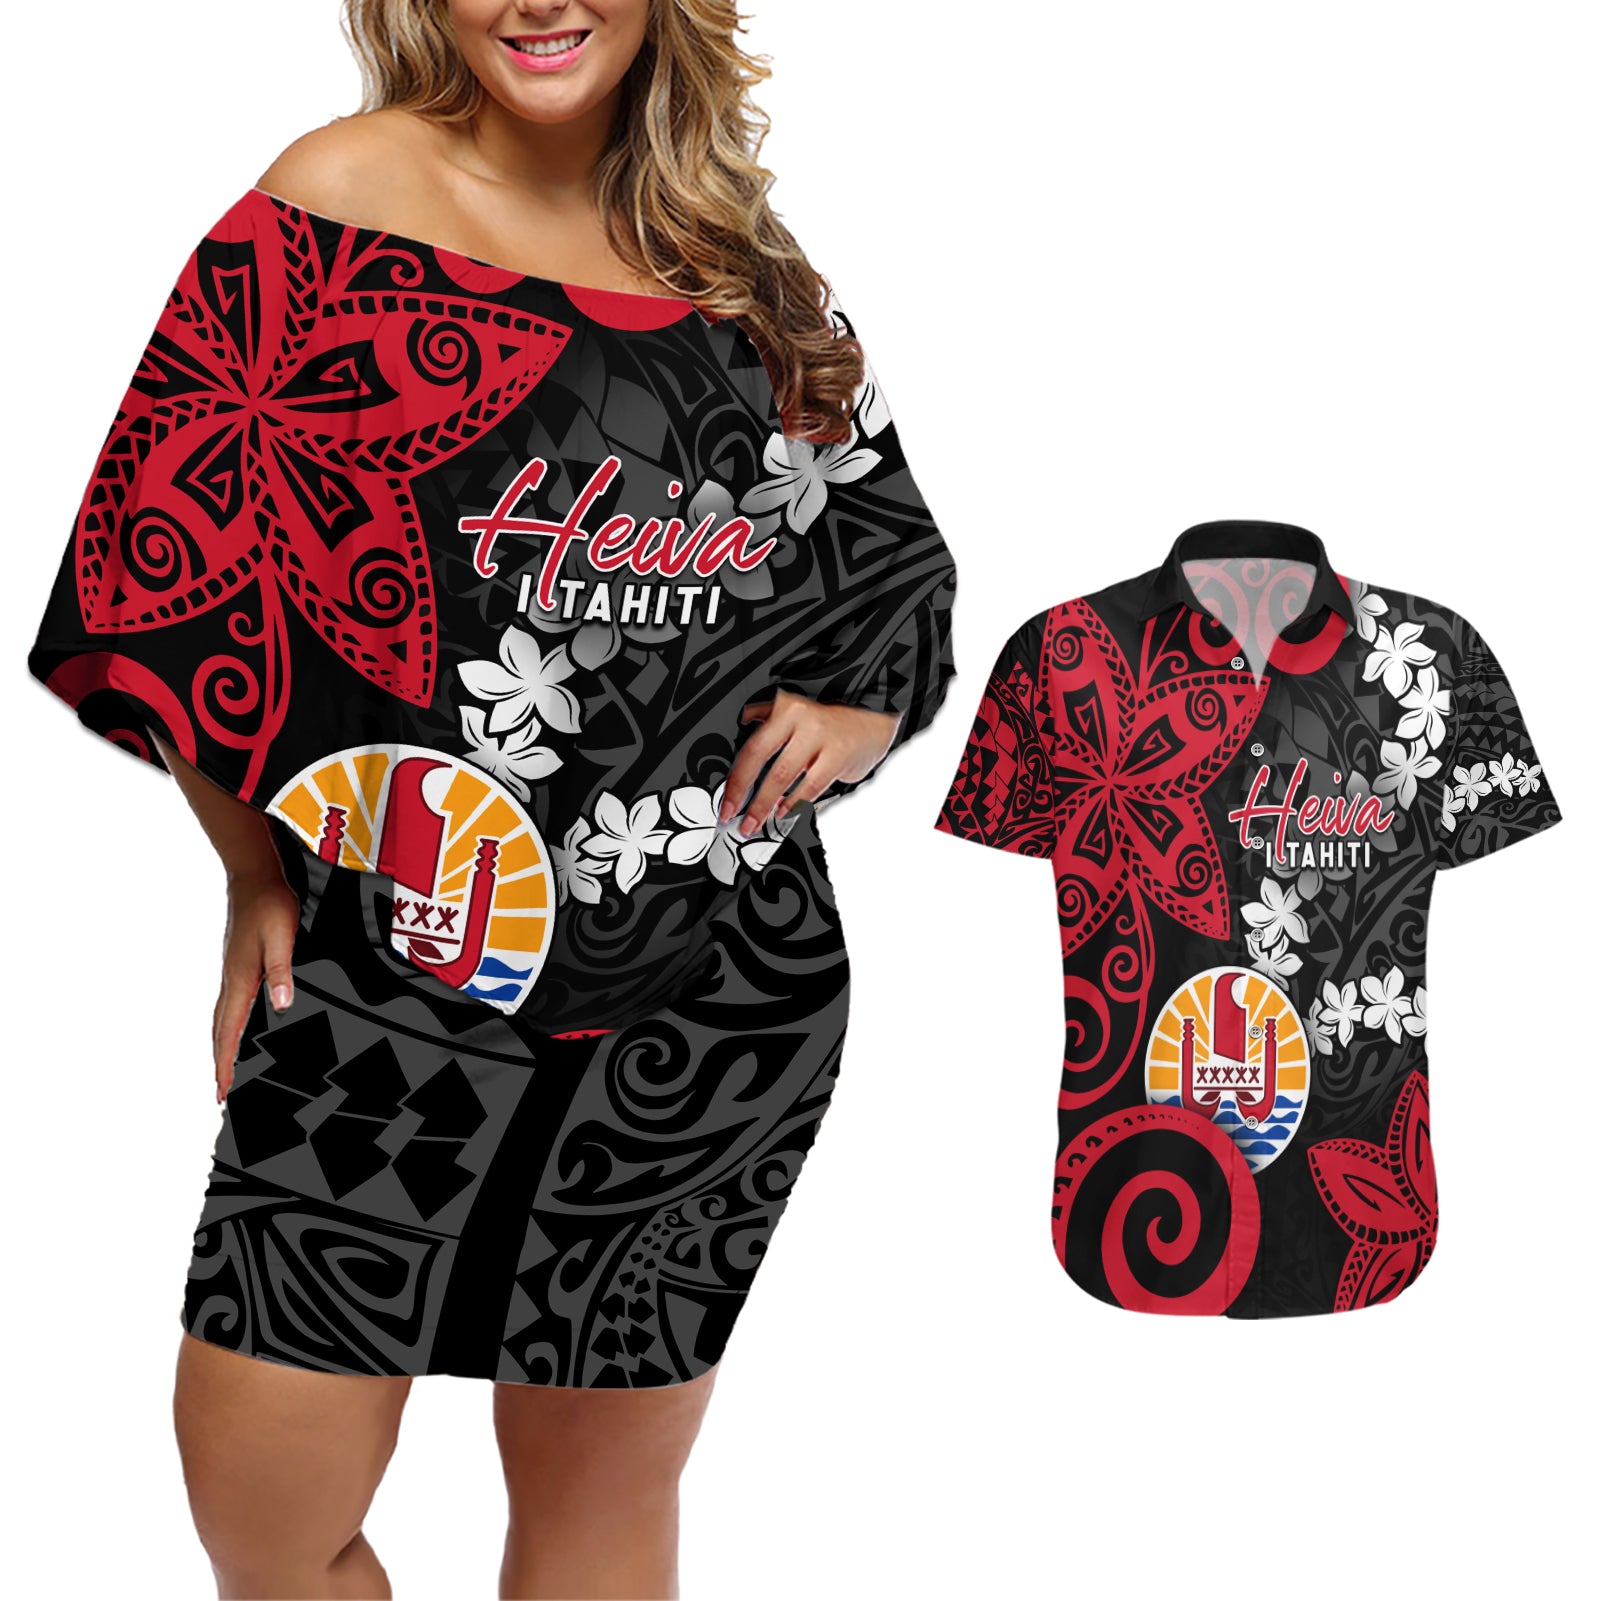 Tahiti Heiva Festival Couples Matching Off Shoulder Short Dress and Hawaiian Shirt Floral Pattern With Coat Of Arms